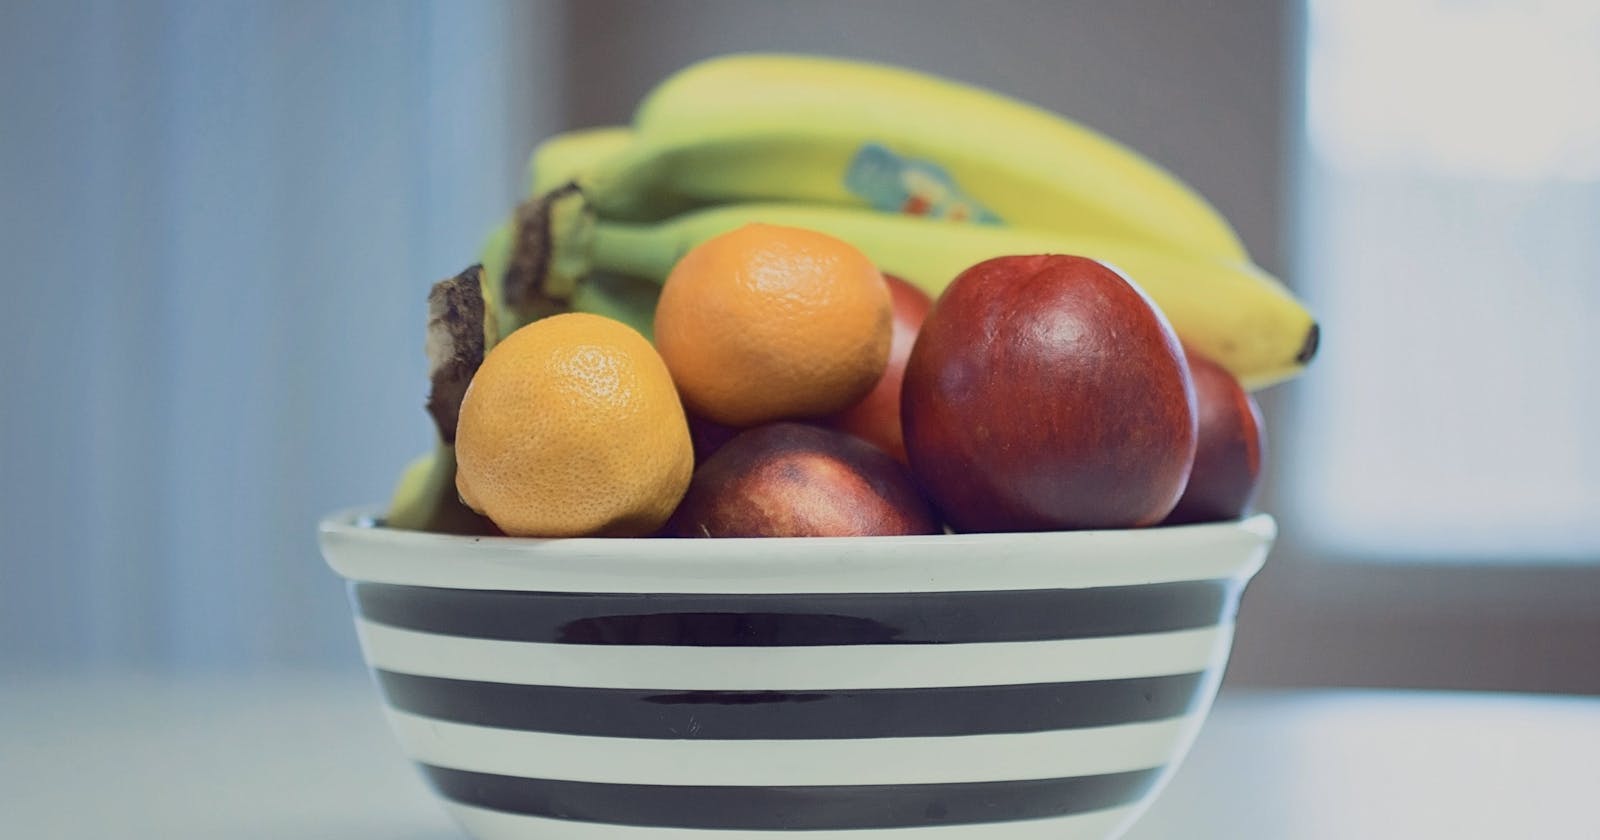 The free fruit bowl misconception